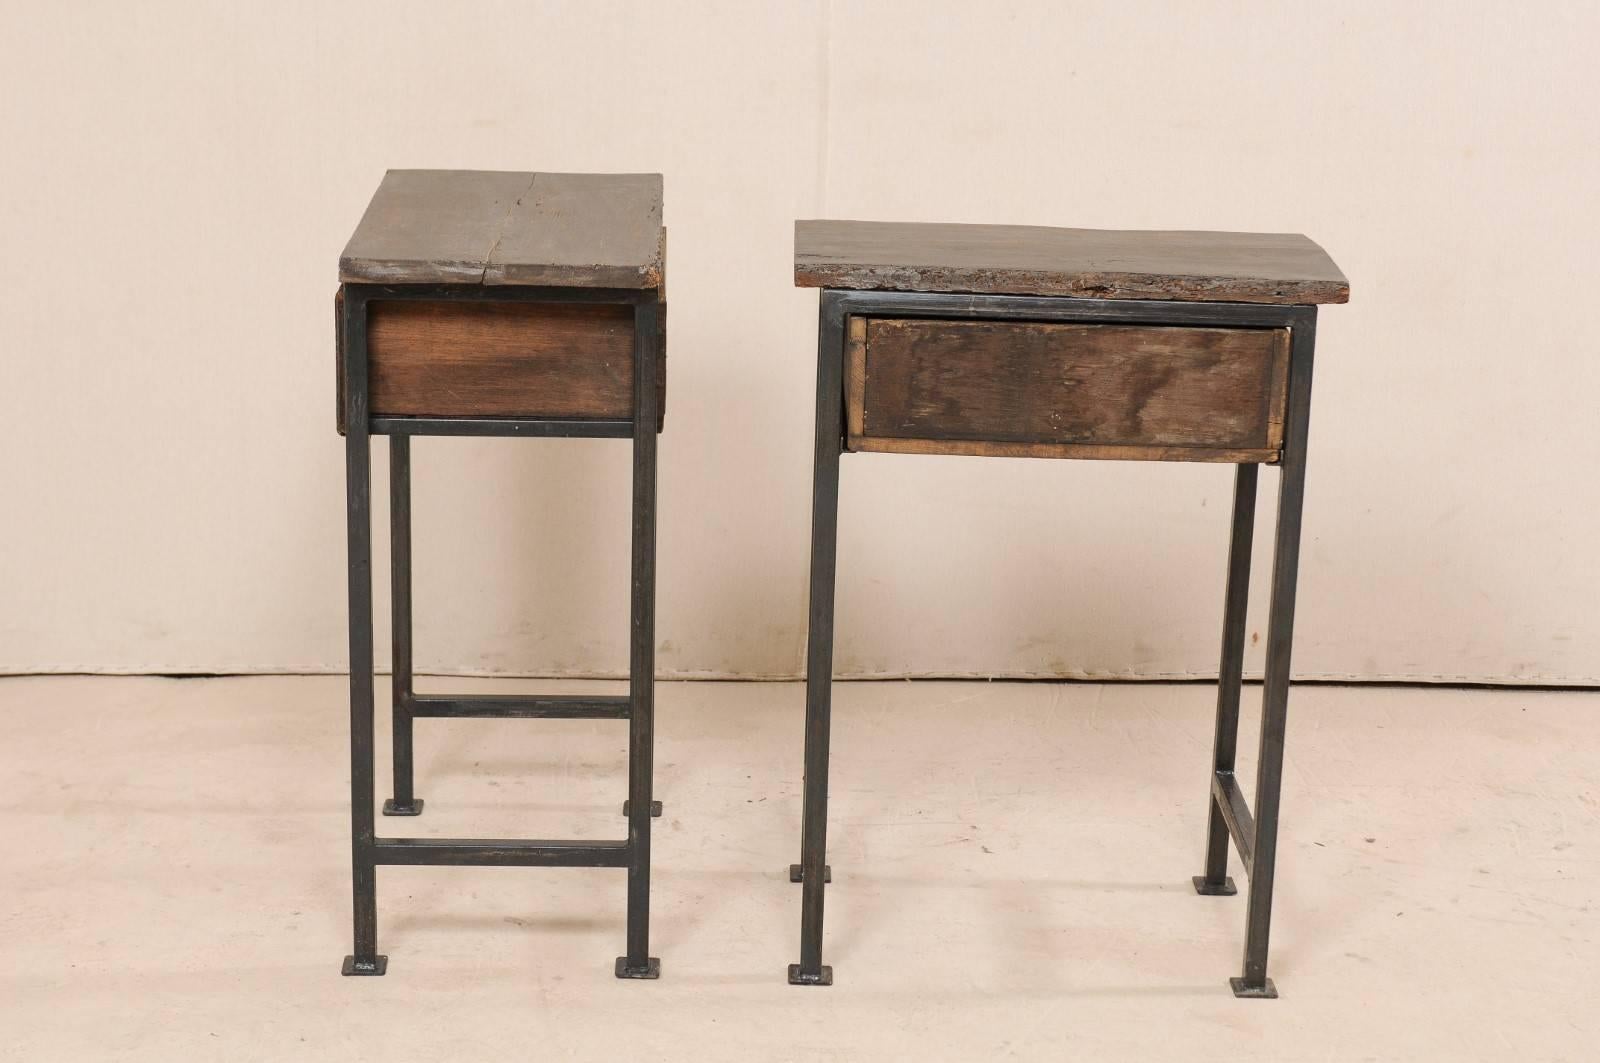 Pair of Spanish 18th Century Single Drawer Wood Side Tables on Iron Legs 1